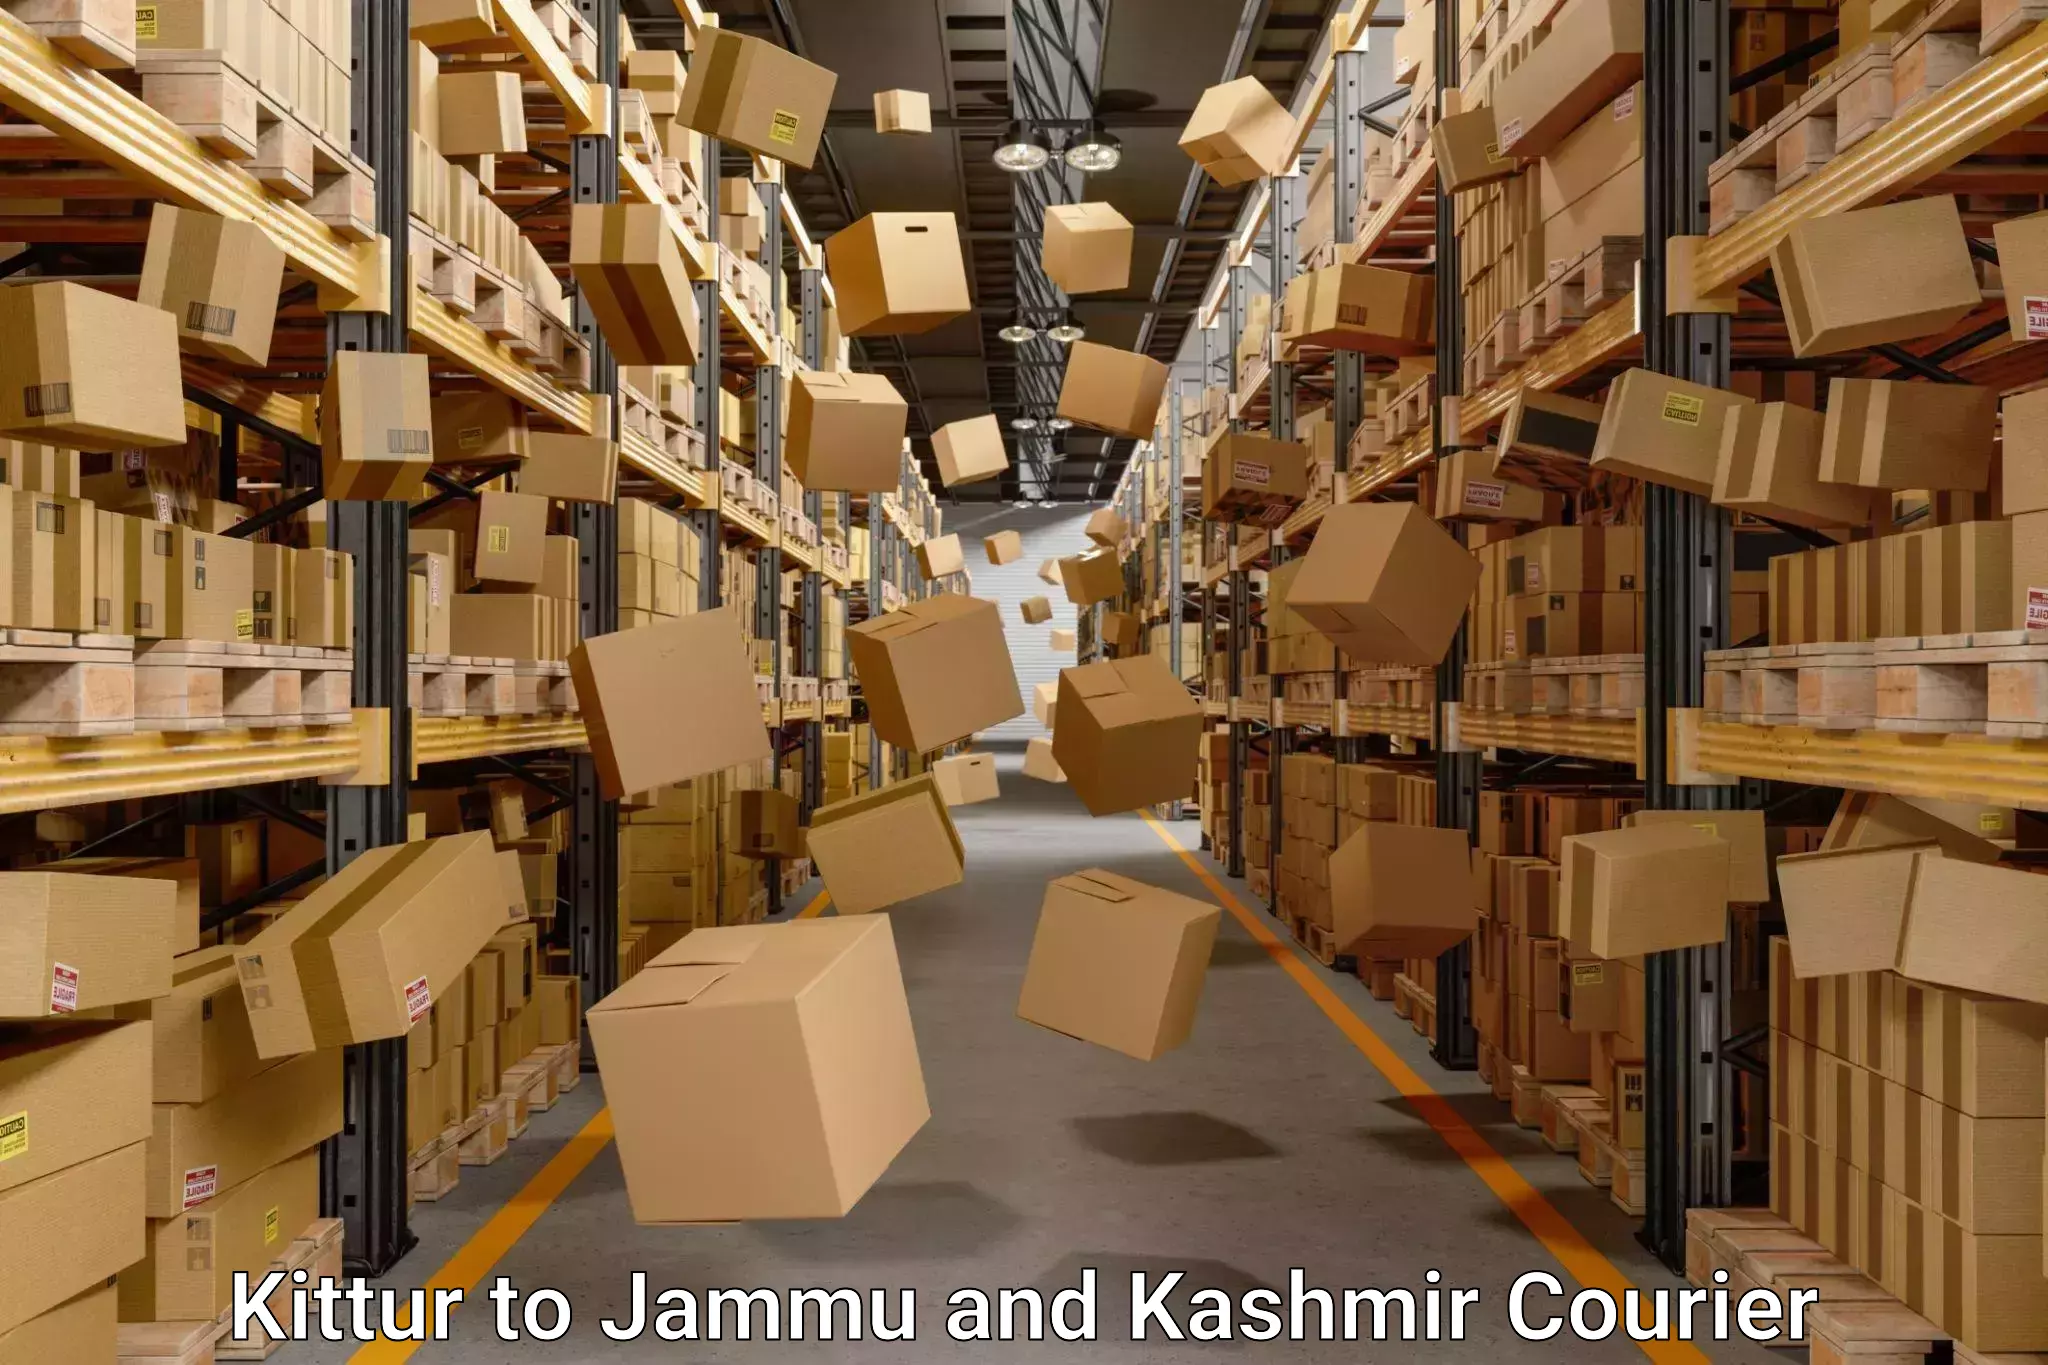 Furniture relocation experts Kittur to Baramulla